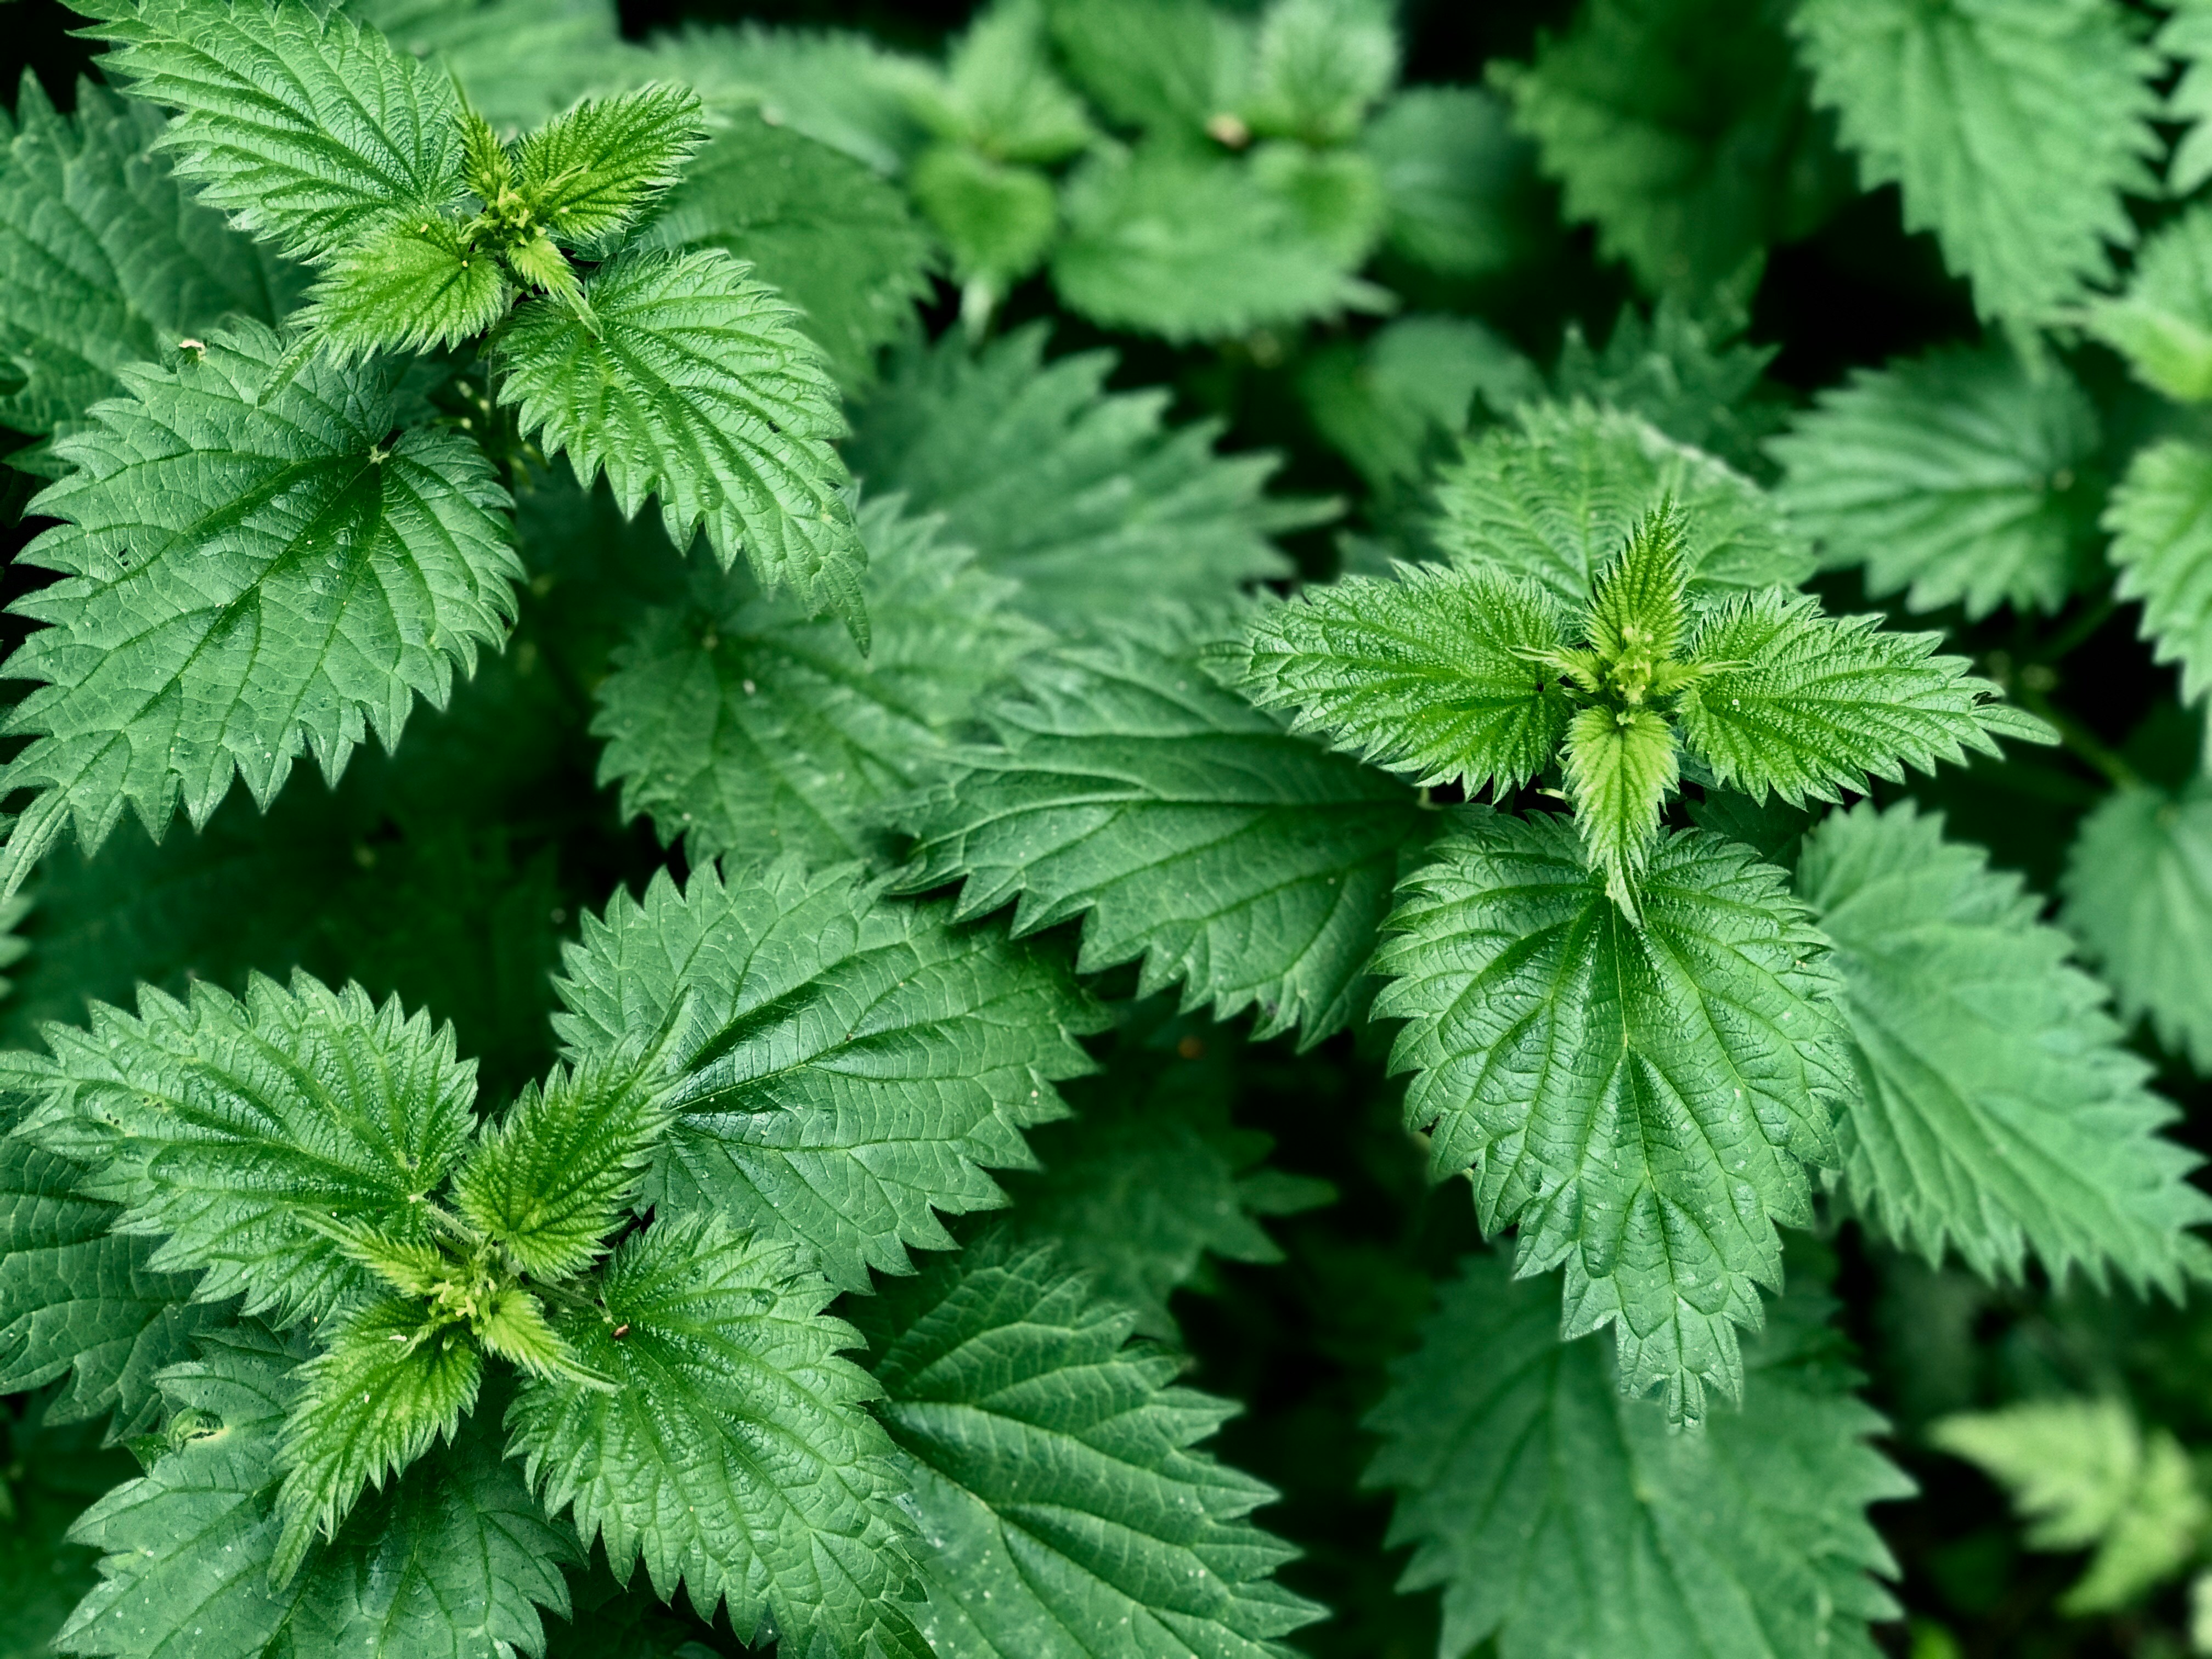 A close-up of green stinging nettles